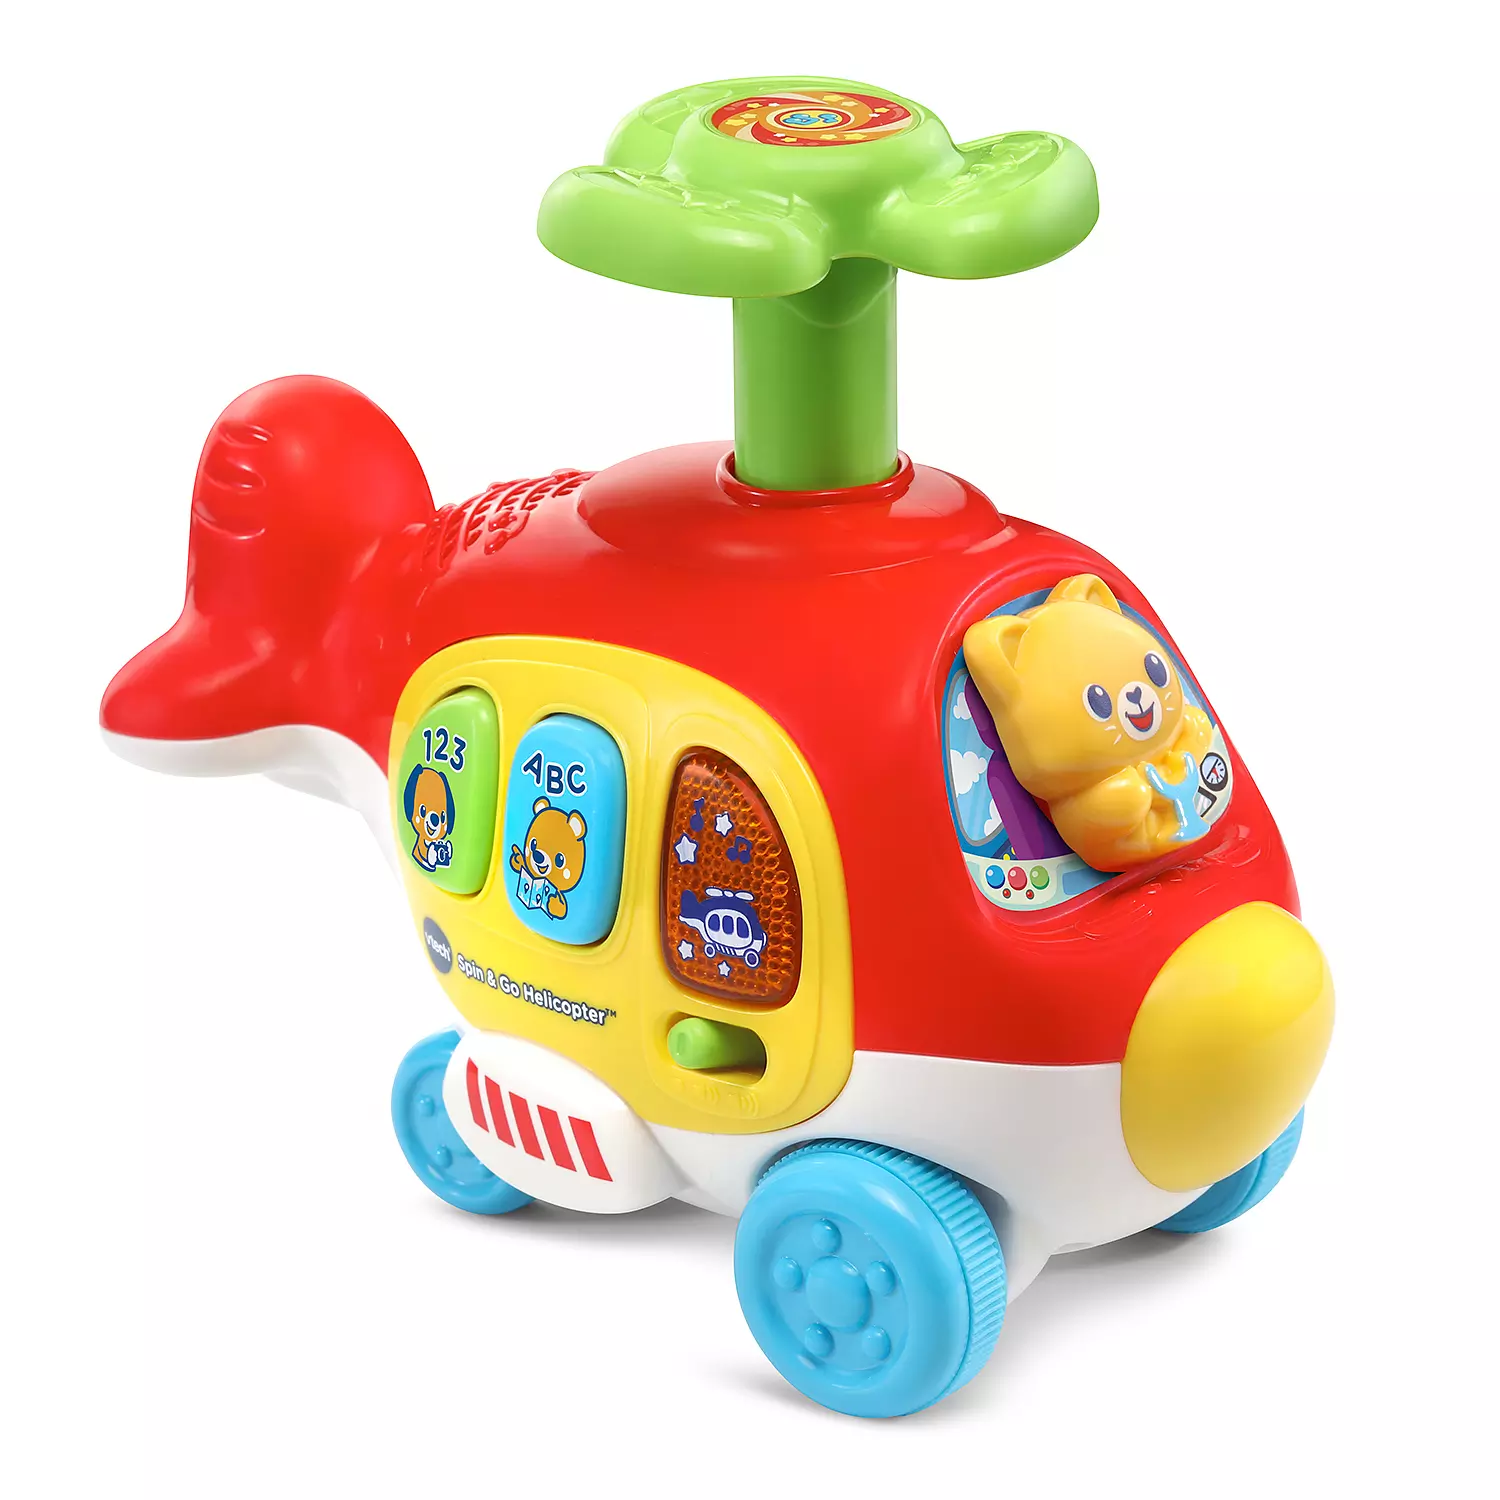 VTech - Spin & go helicopter, English edition